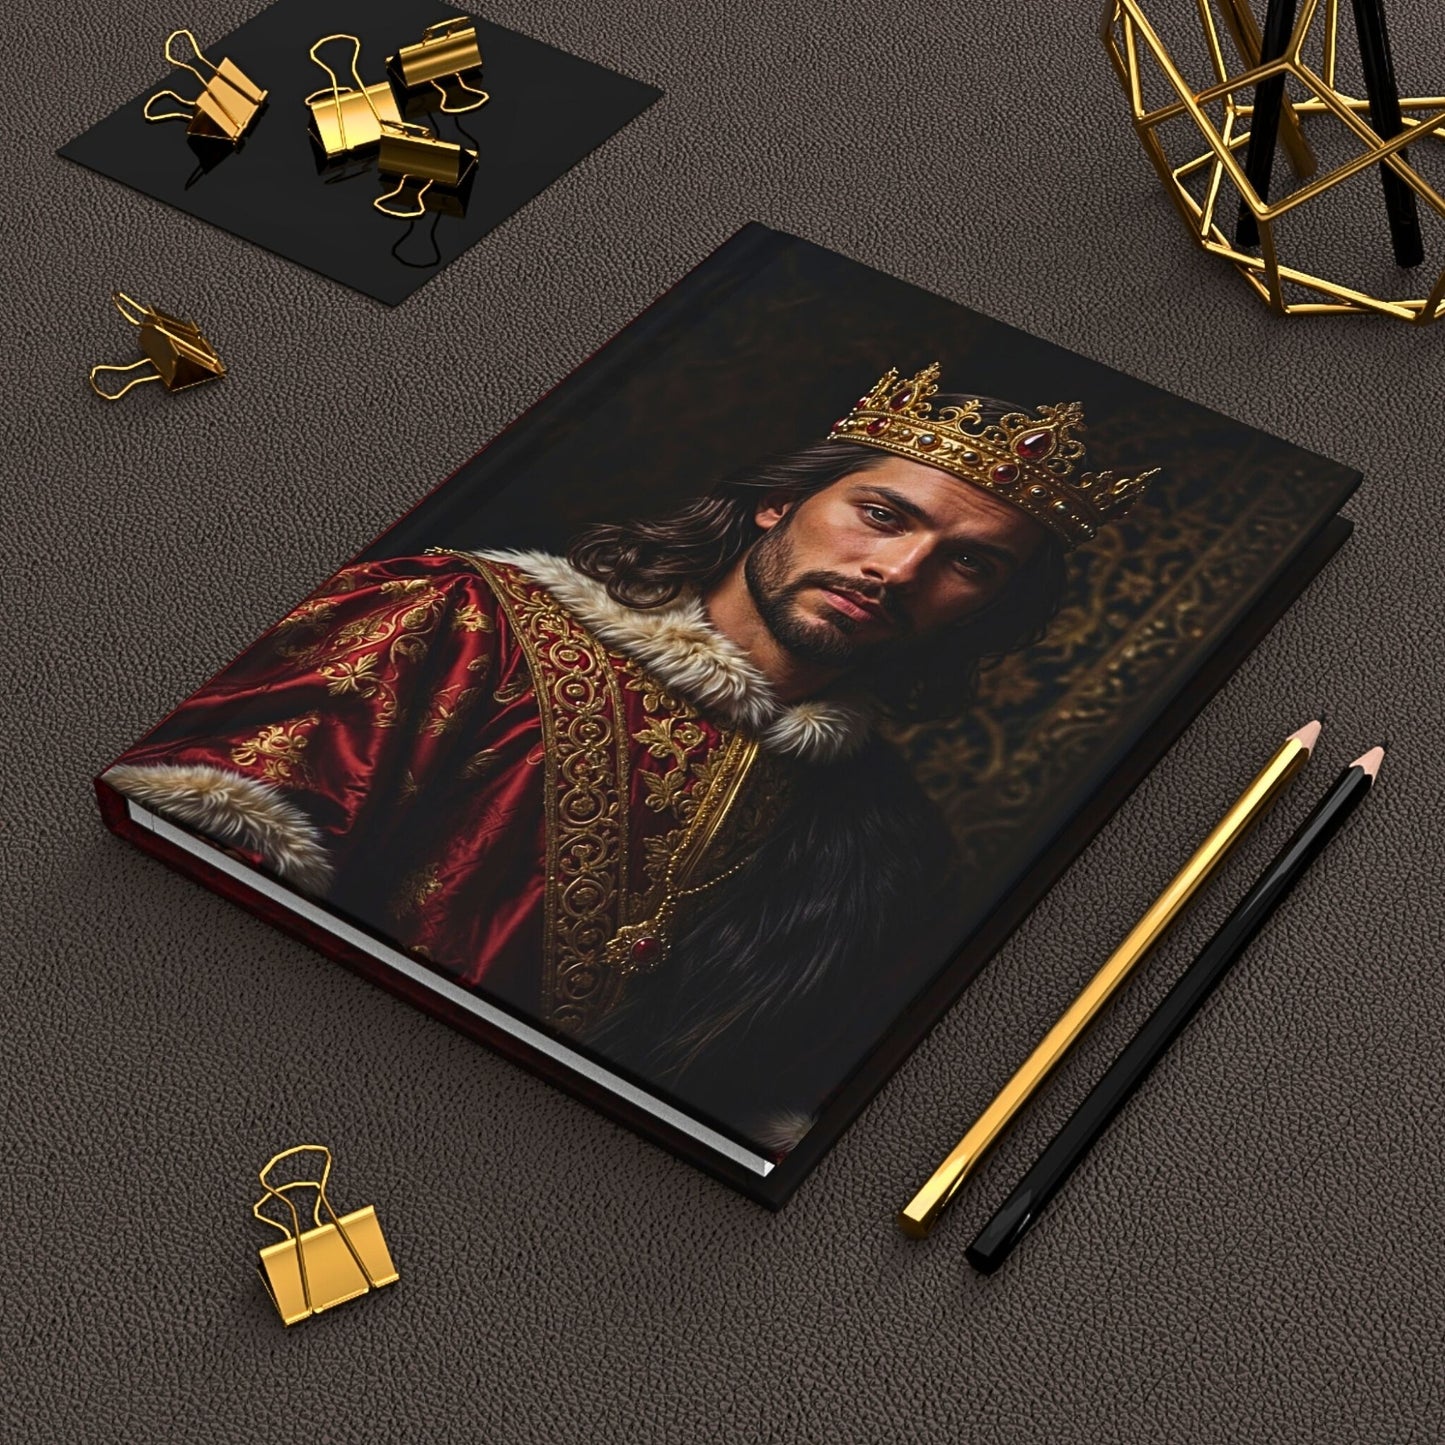 Custom Journal from Photo, Personalized King Journal - Unique Gift for Him - Father's Day Special. A15.3